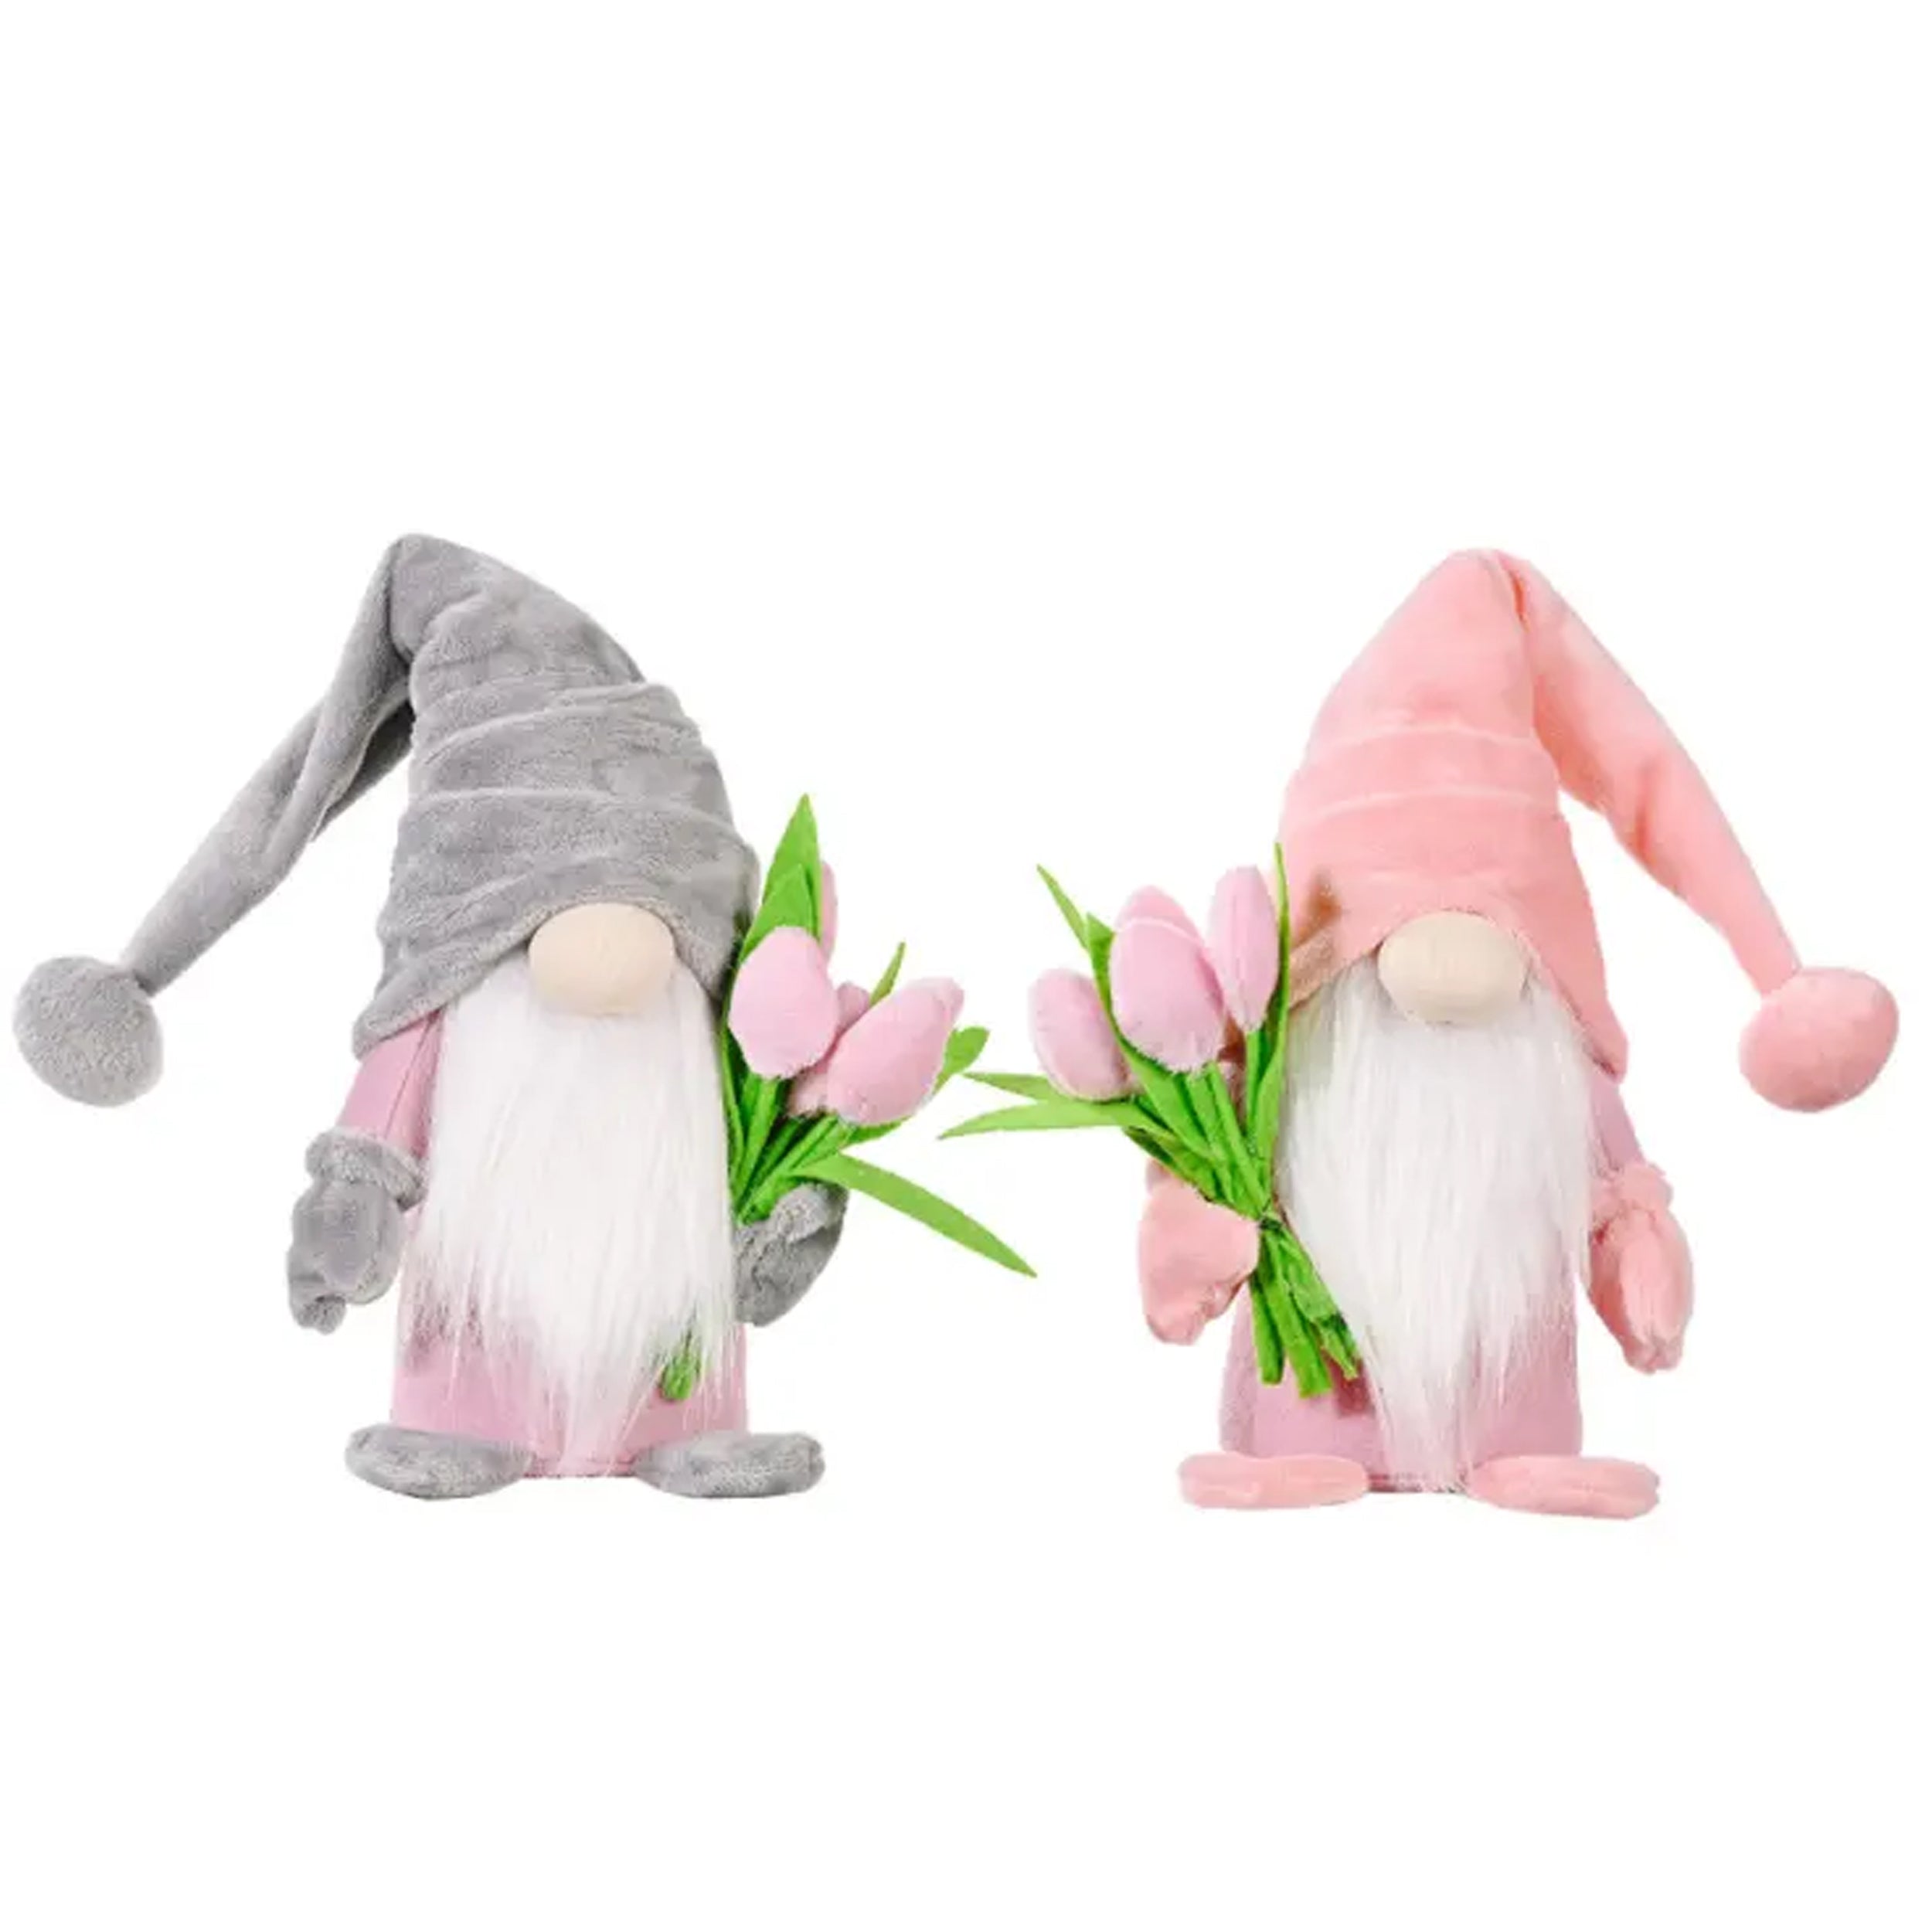 New Spring Gnomes Décor Mother's Day Plush Toy - Adorable and Festive Gift for Mom